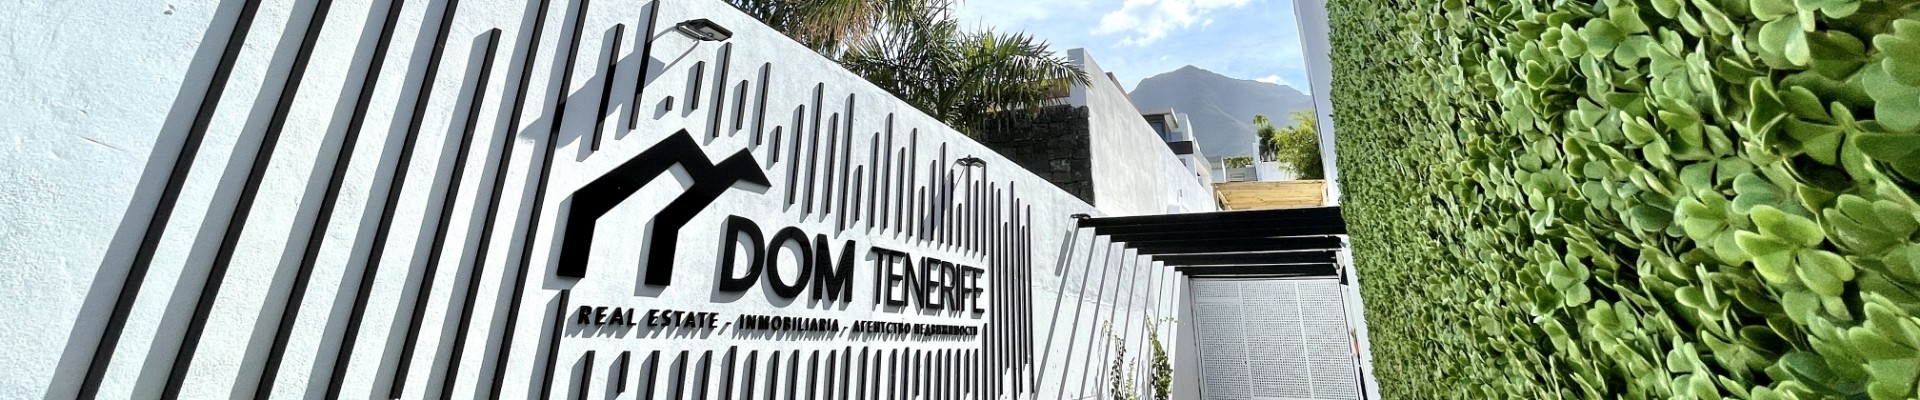 Sell your property with DOM Tenerife Real Estate